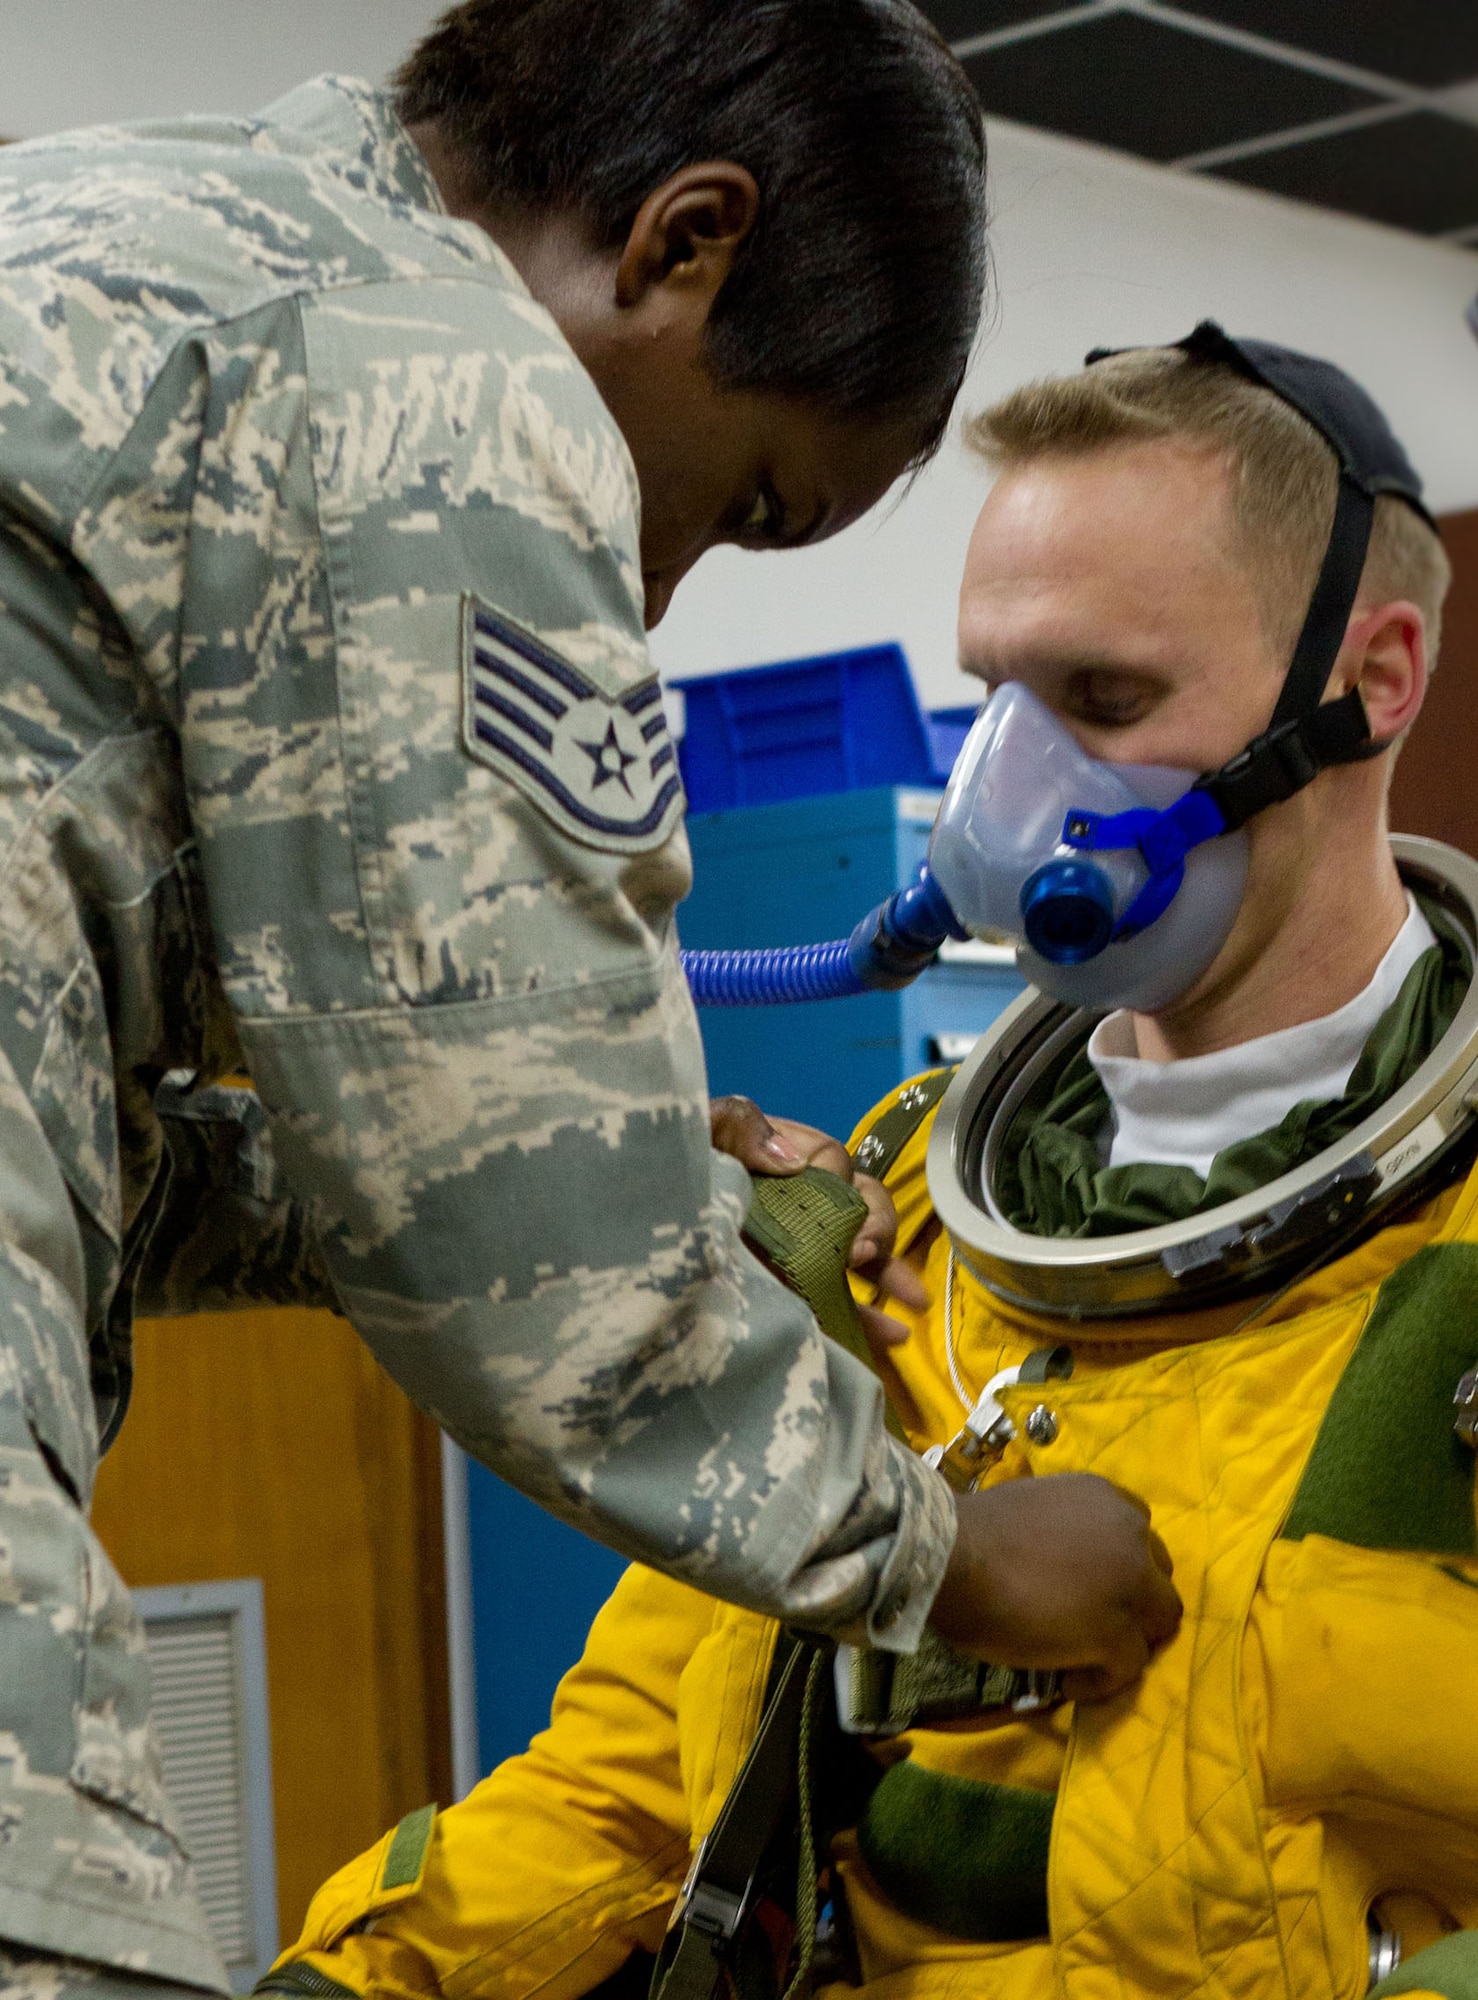 SOUTHWEST ASIA - U.S. Air Force Staff Sgt. Jasmine Chambers, 99th Expeditionary Reconnaissance Squadron physiology support detachment technician, helps Capt. Peter, 99th ERS U-2 pilot, into a full-pressure suit July 17, 2012. Two PSD technicians and a supervisor are required to assist the pilot into the suit to prevent damage. (U.S. Air Force photo/Senior Airman Alexander Recupero)